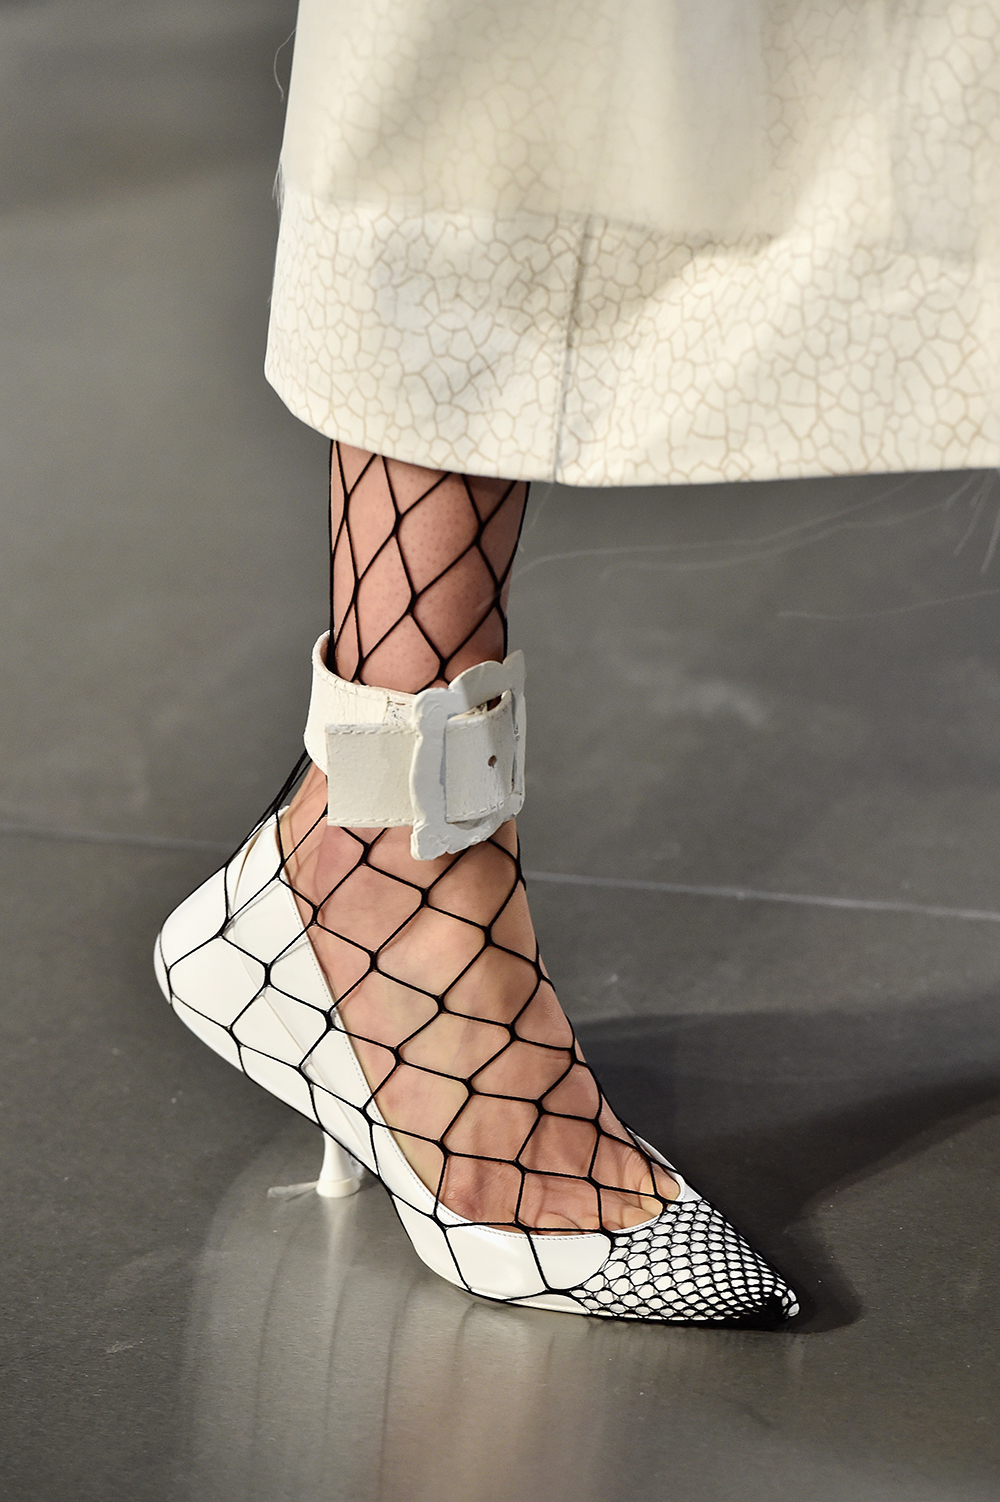 A new way of wearing your tights this spring? Fishnets were worn over shoes at Maison Margiela. Photo / Getty Images